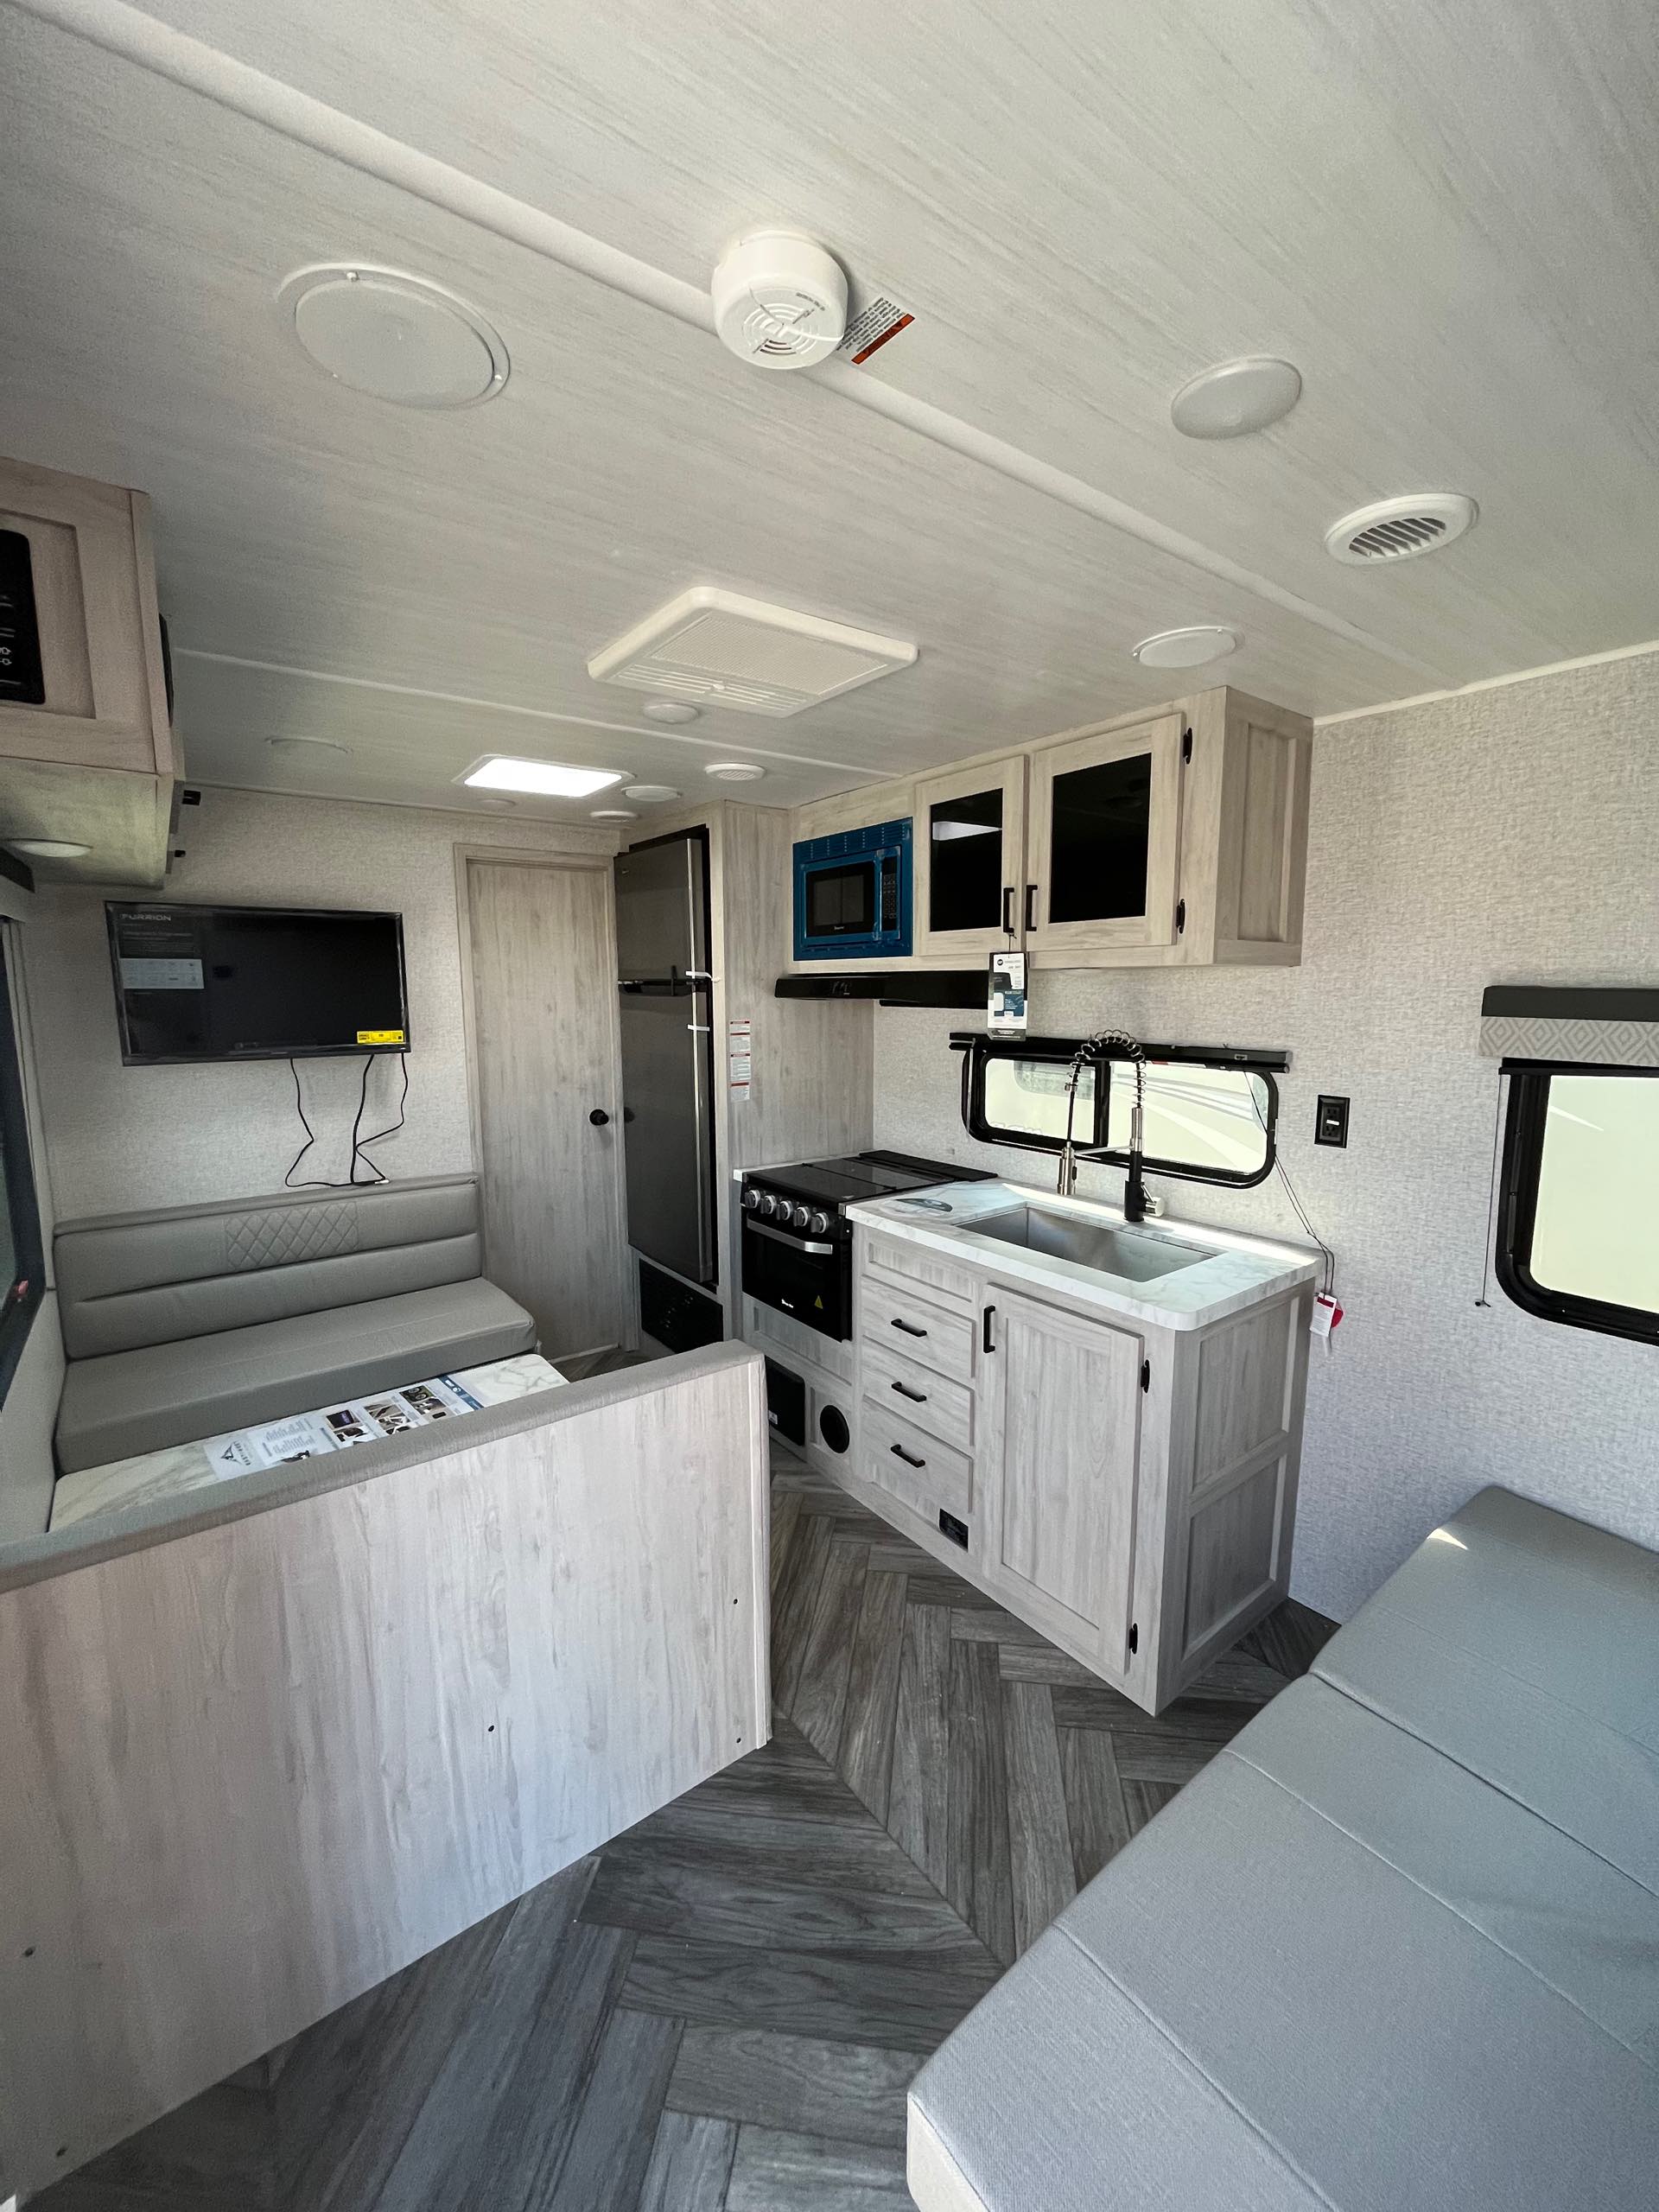 2023 EAST TO WEST DELLA TERRA at Prosser's Premium RV Outlet